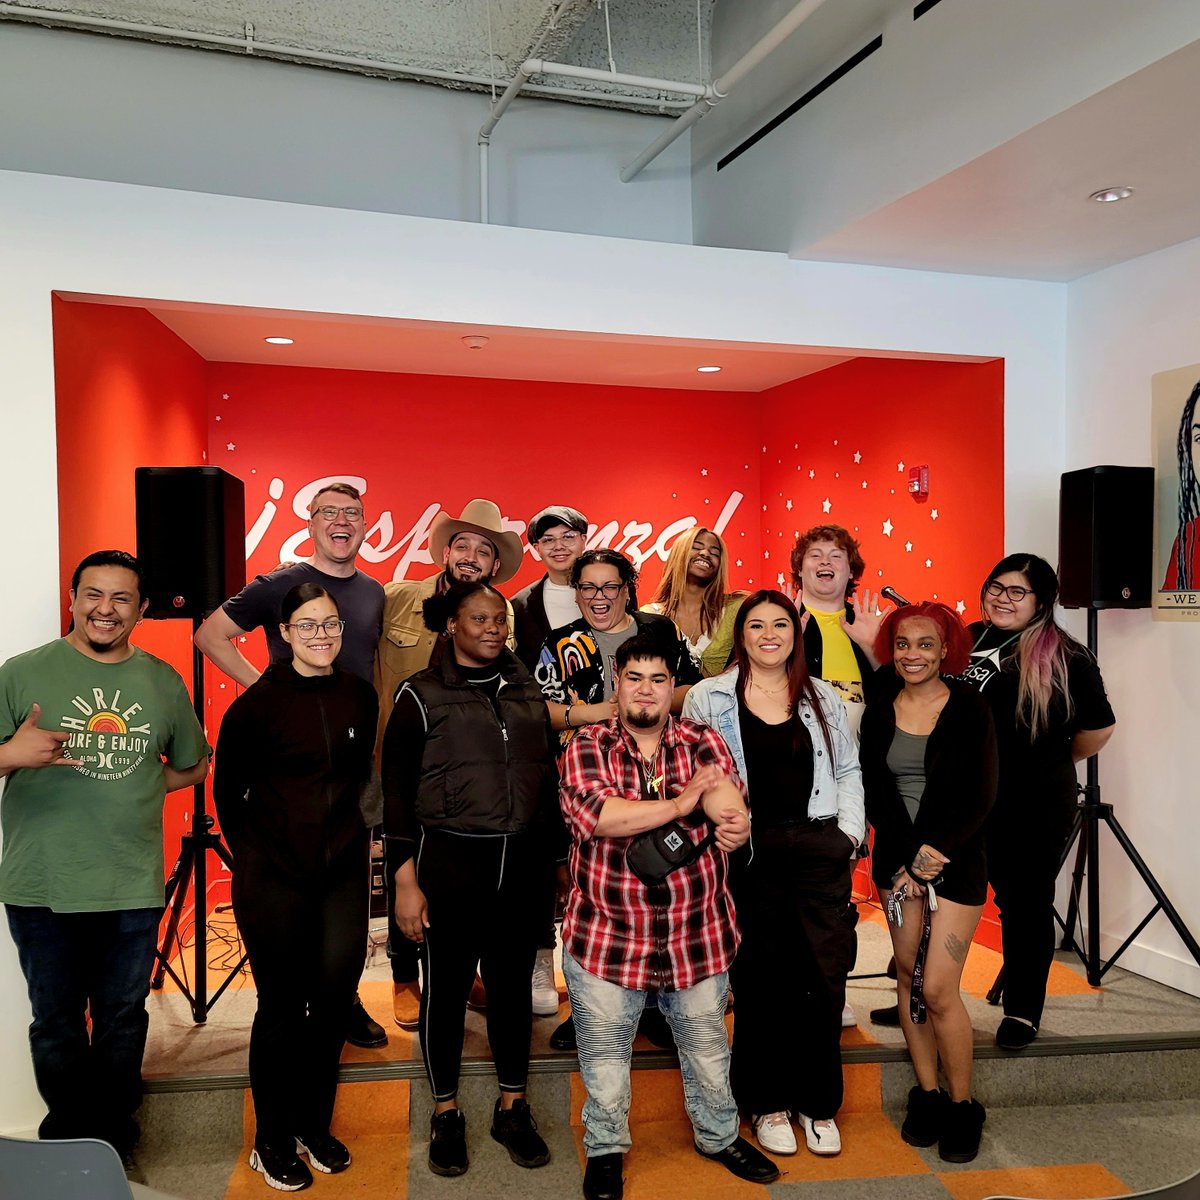 We knew #LaCasaNorte's youth clients were talented, but WOW! Last Friday, our Casa Corazon youth drop-in hosted an open mic that👏did👏not👏disappoint. The night's performers dazzled us with original music & moving poetry, and we can't wait for the next one. #MoreThanHousing